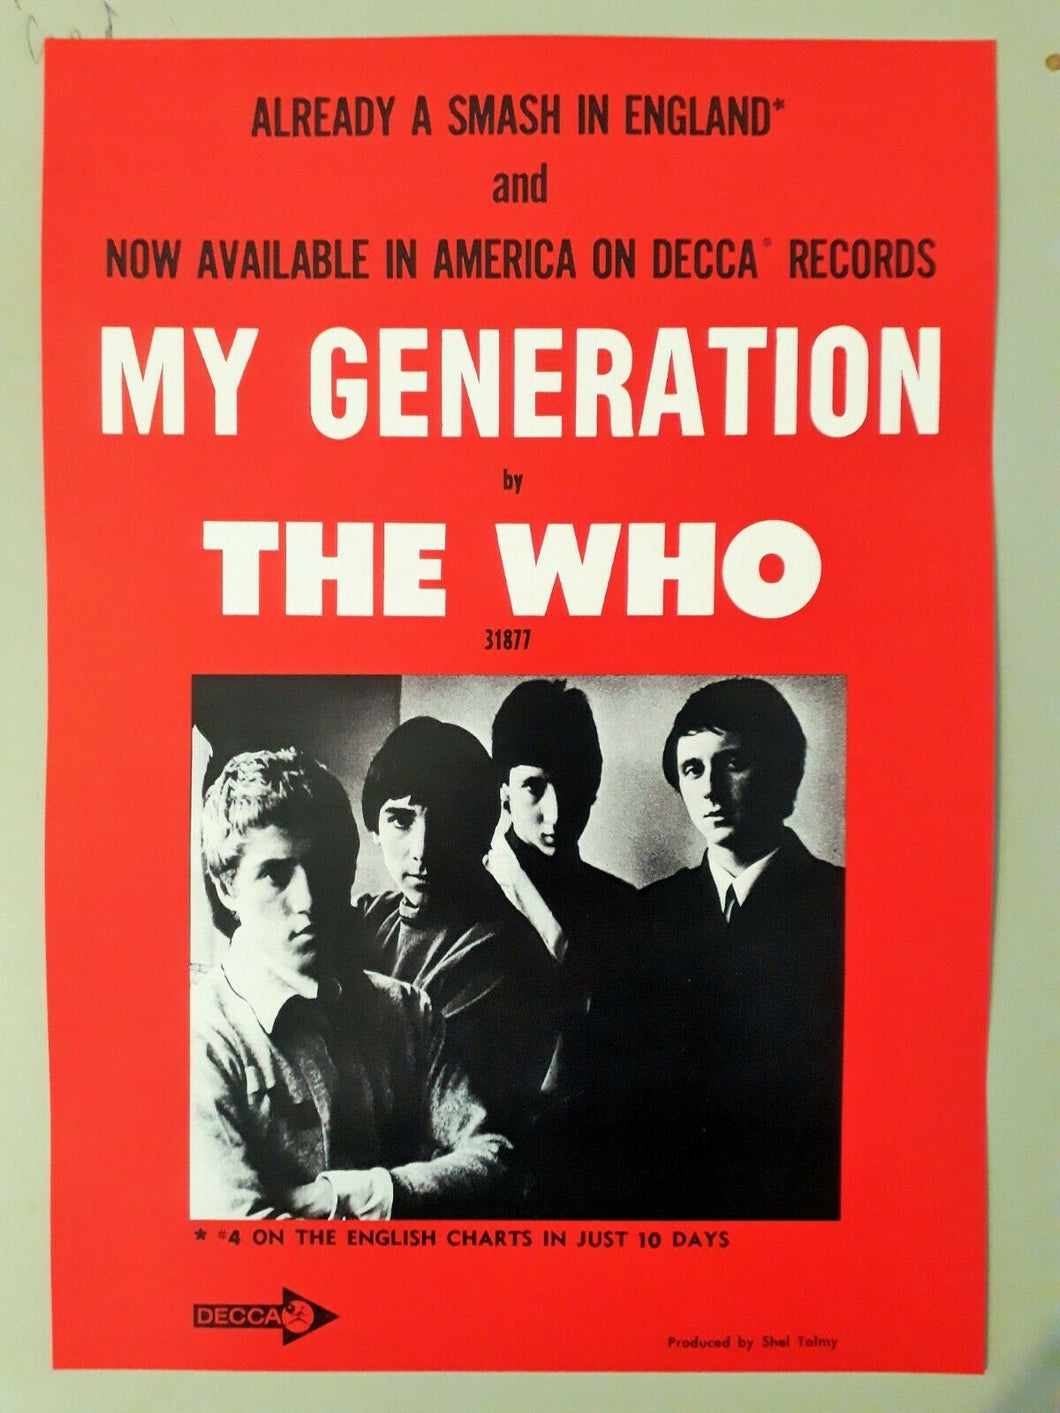 The Who promotional poster - My Generation USA 1966 new reprinted edition A3 - Original Music and Movie Posters for sale from Bamalama - Online Poster Store UK London